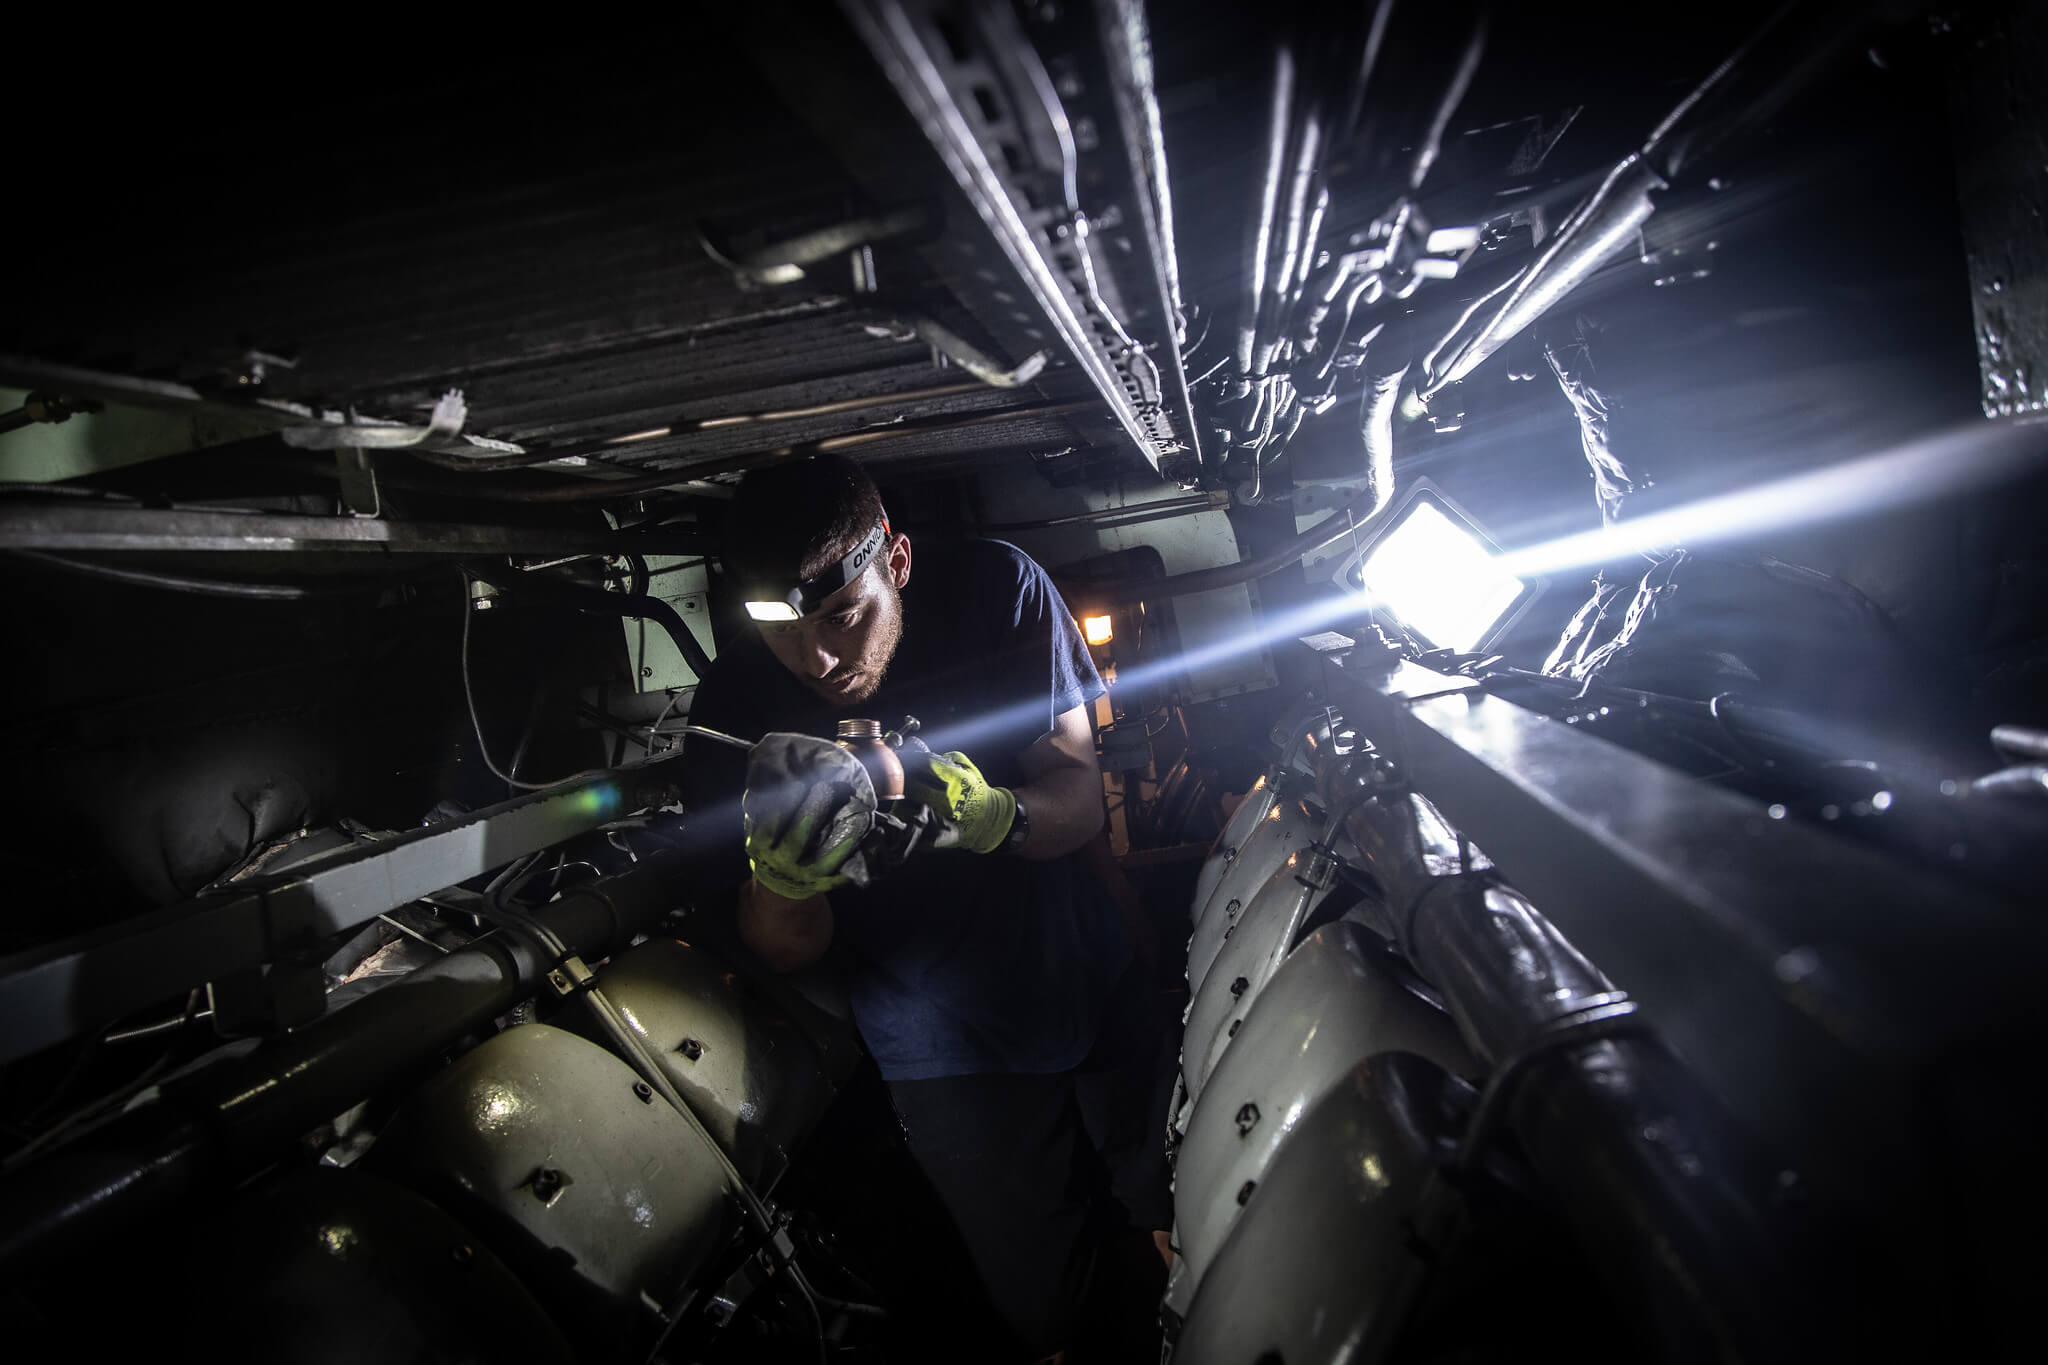 A seaman works in the engine room of a Spanish submarine during the NATO exercise Dynamic Mariner, 2019. © NATO / Flickr